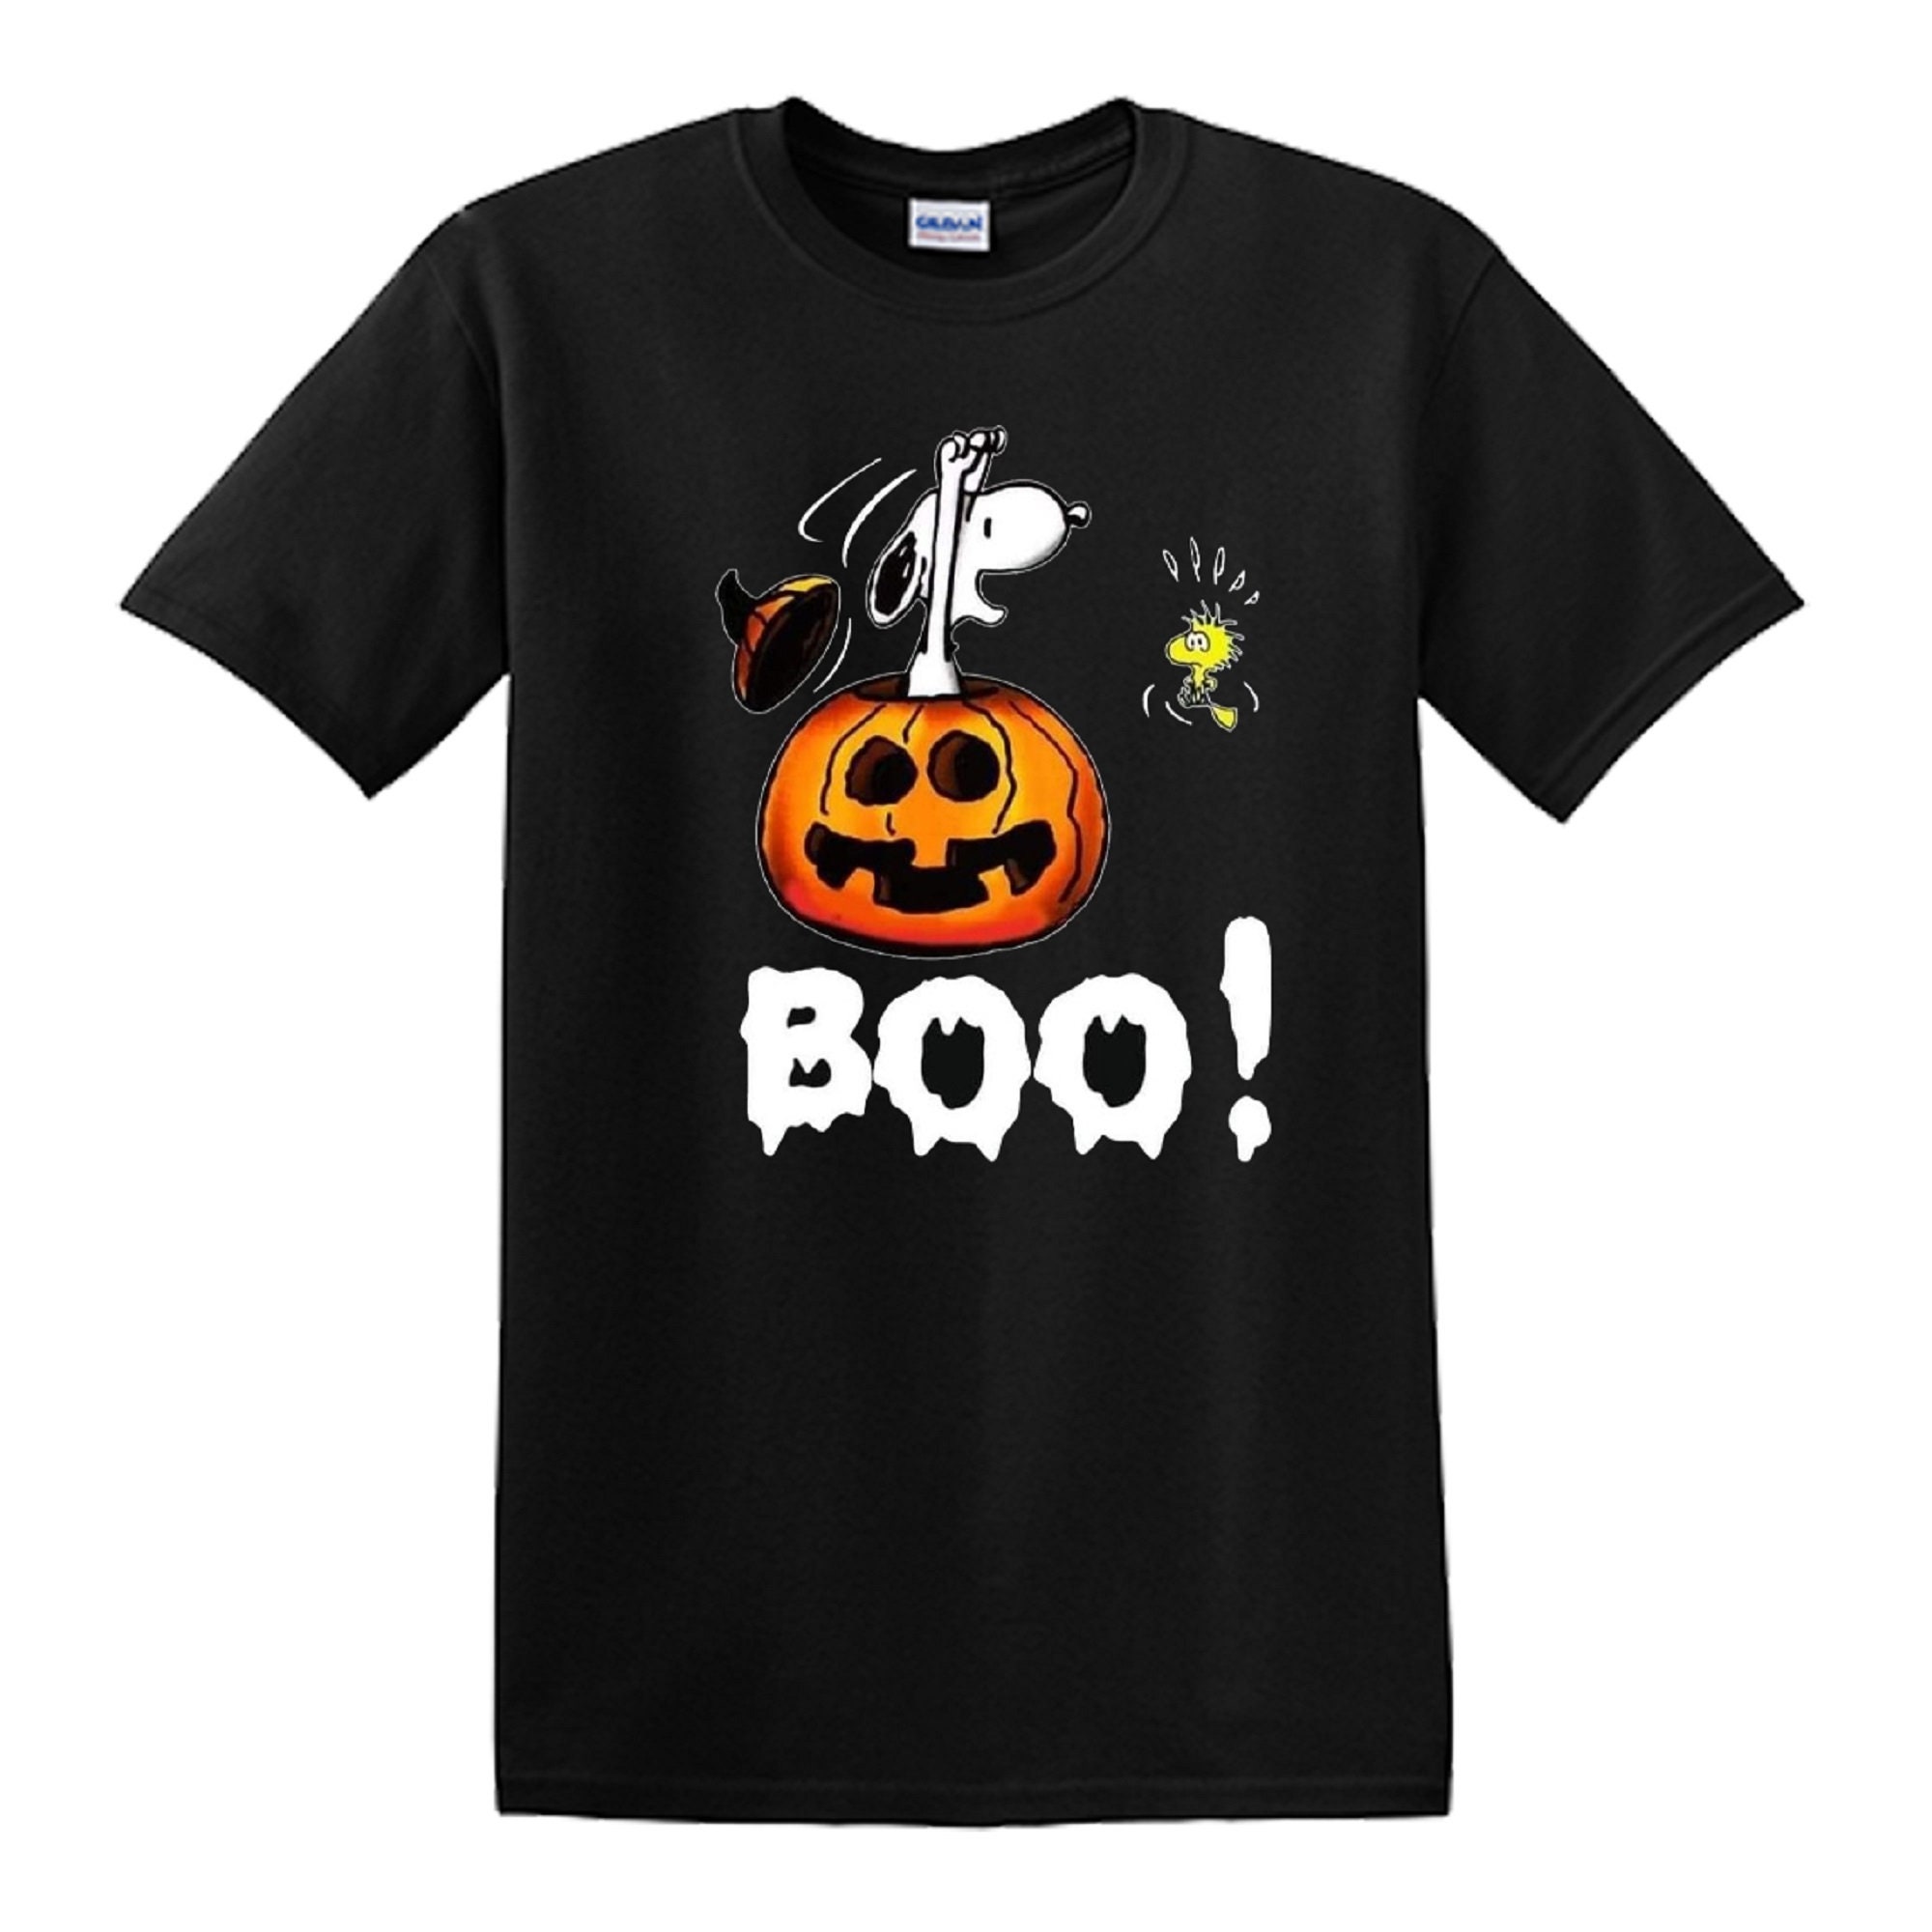 Discover Boo Snoopy Halloween T-Shirt